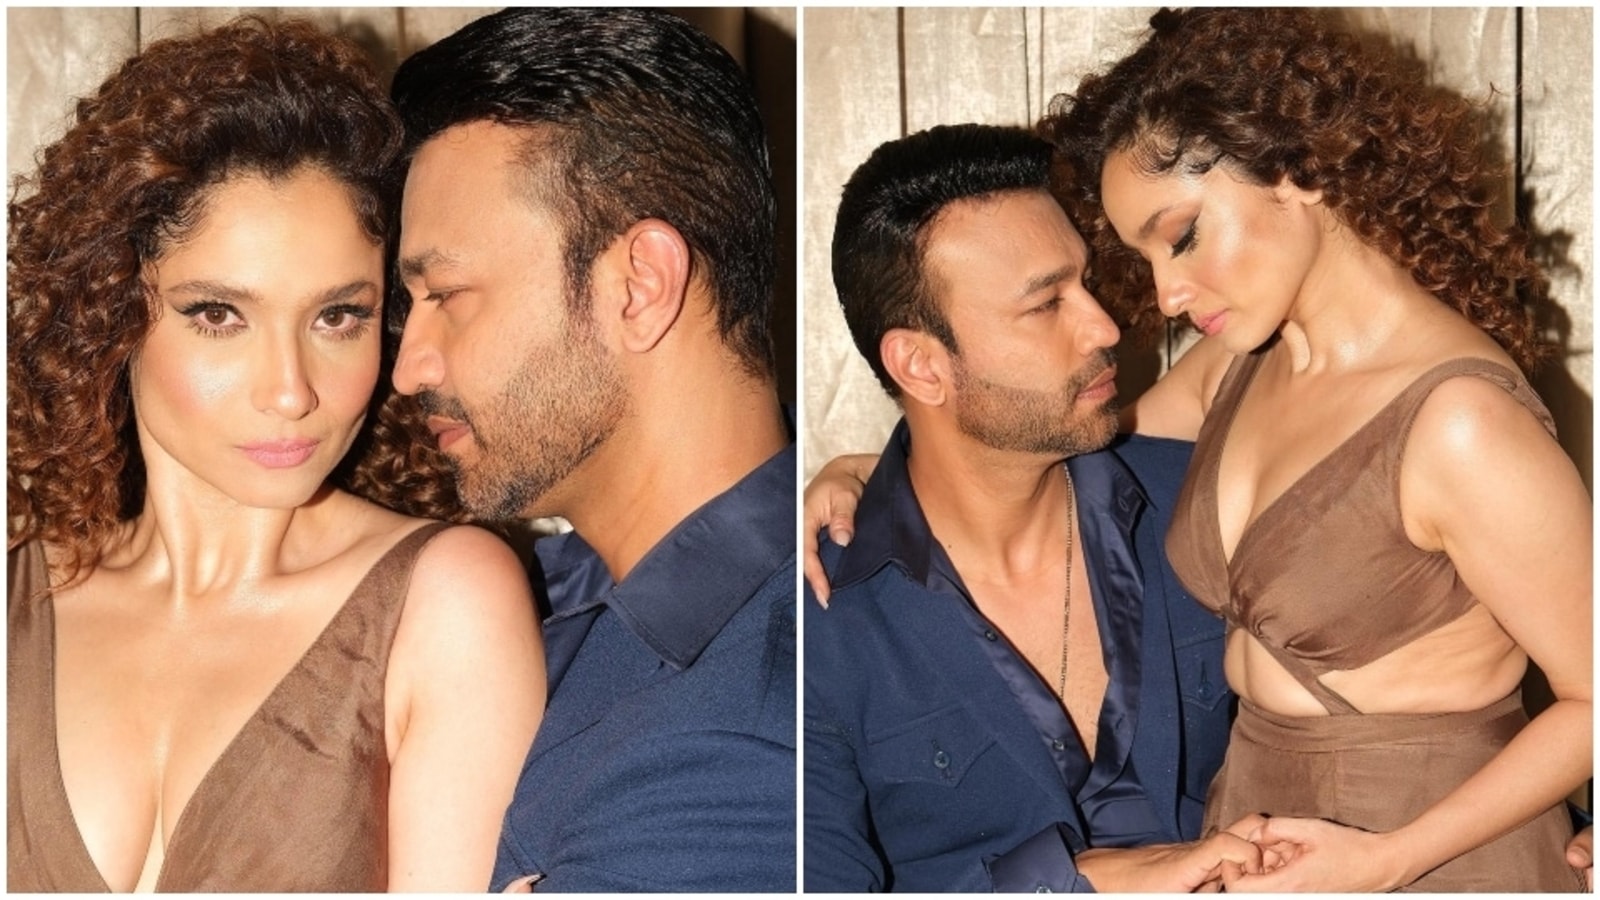 Ankita Lokhande’s sizzling chemistry with husband Vicky Jain in new photoshoot will leave you swooning